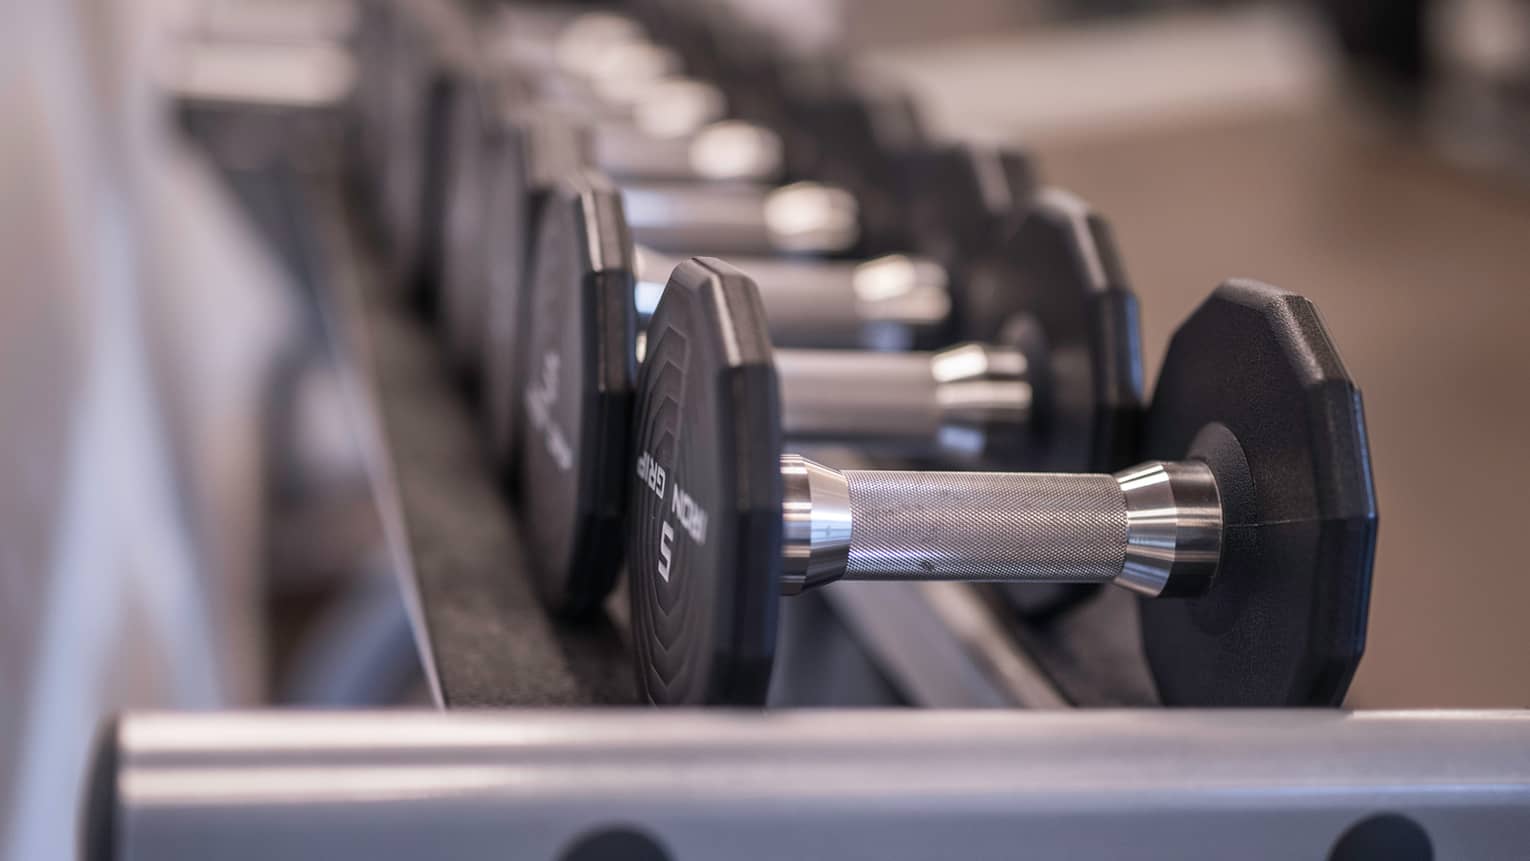 Close-up of black and metal dumbbell hand weights in row on rack